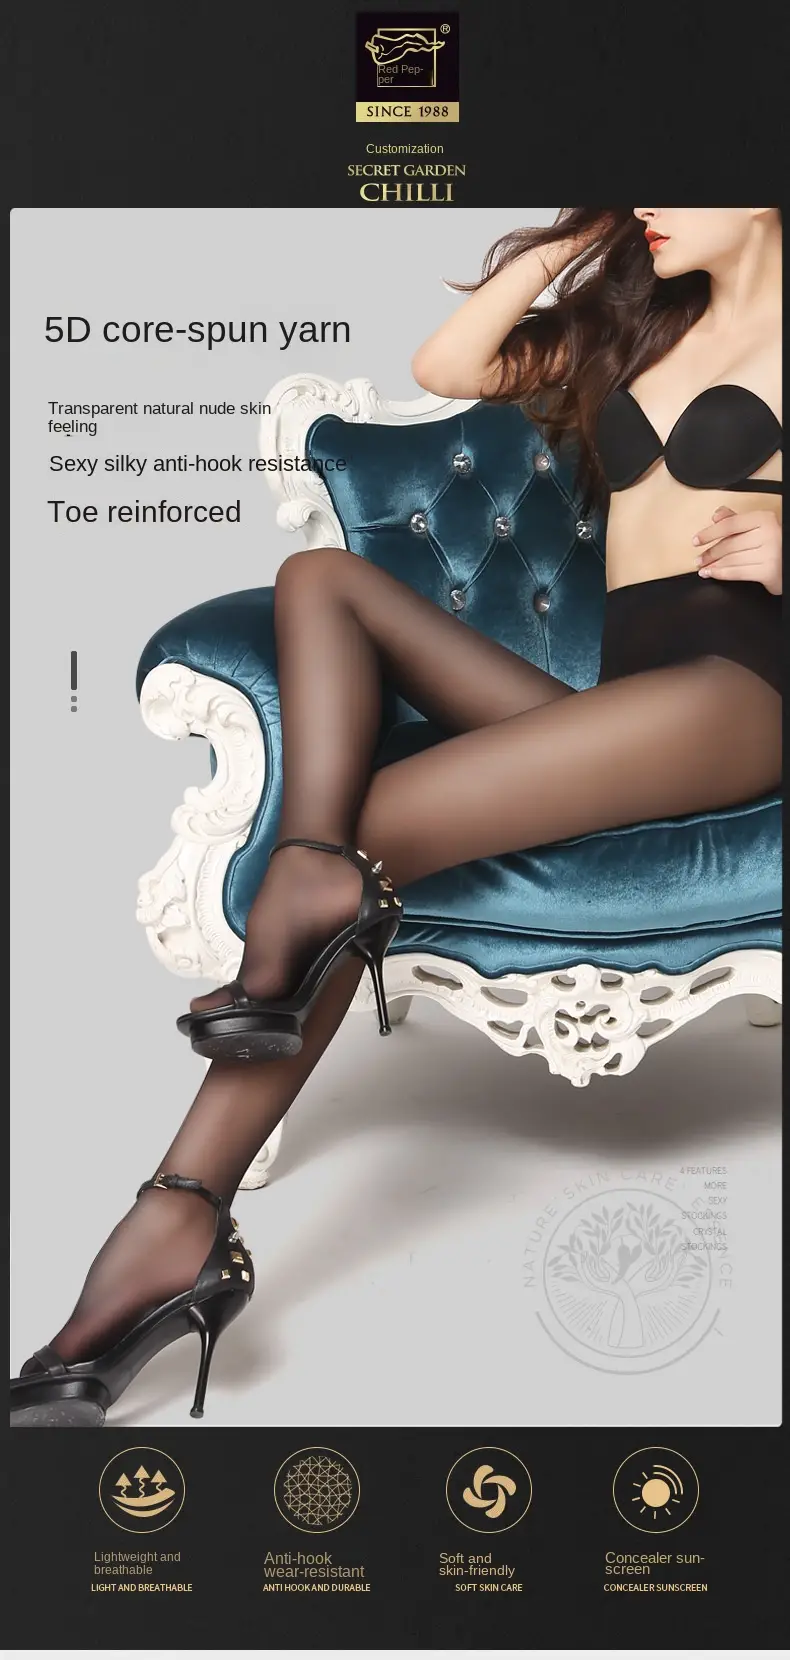 chanel tights for women